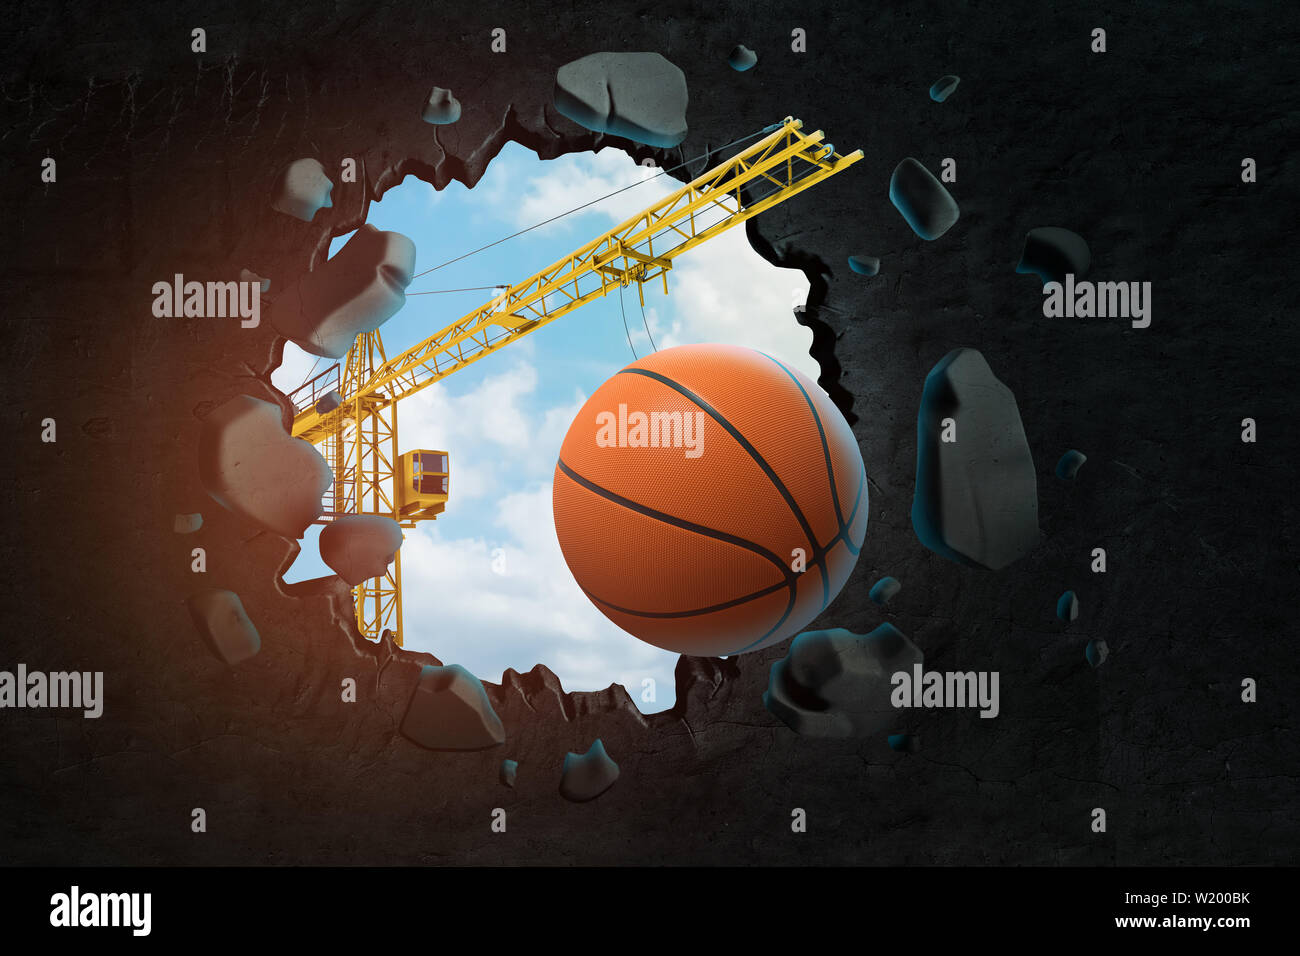 3d rendering of construction crane and orange basketball ball seen through black wall hole Stock Photo